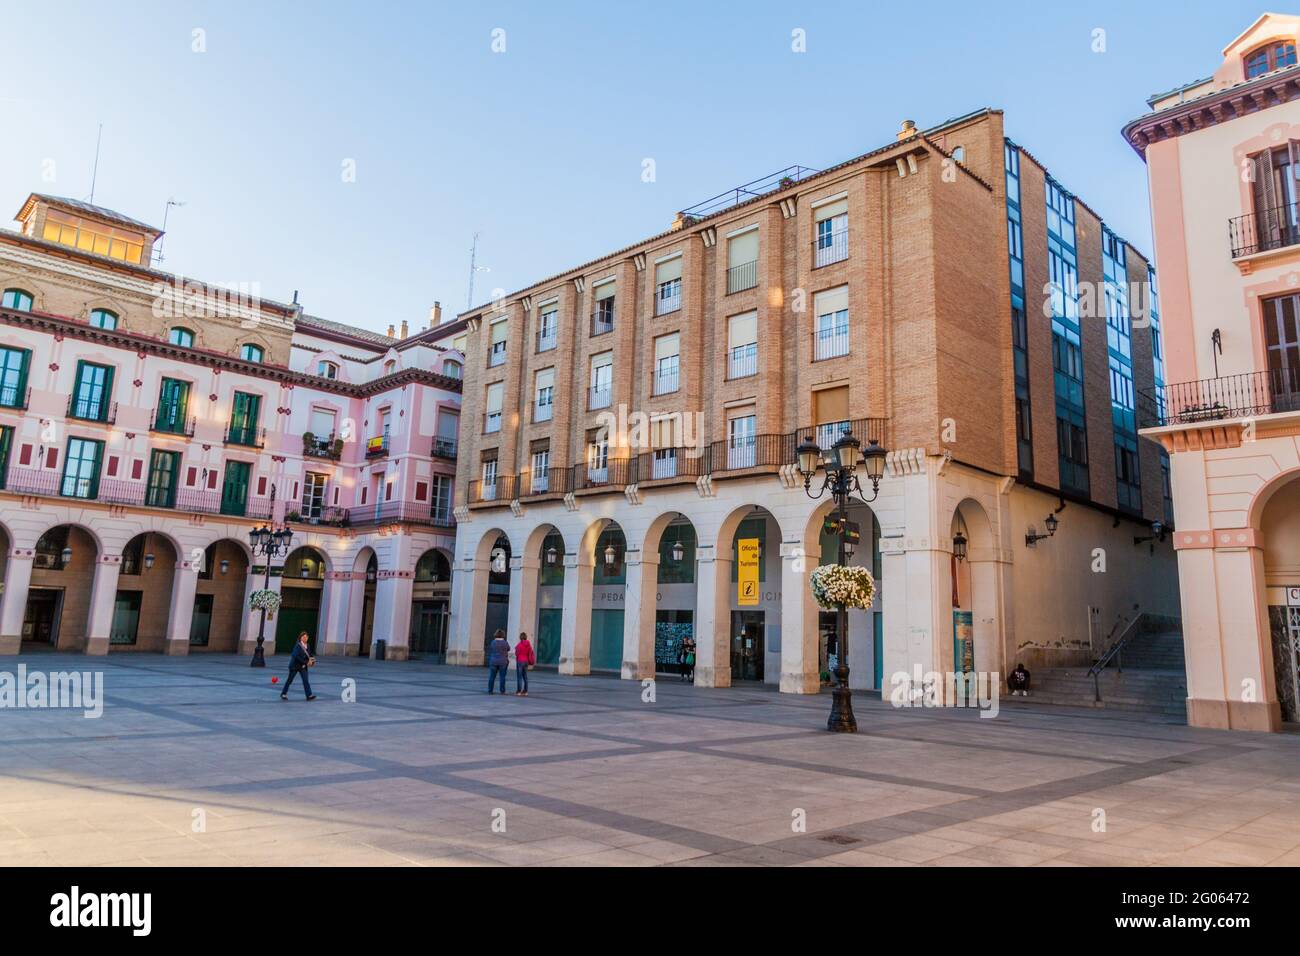 HUESCA, SPAIN - OCTOBER 29, 2017: View of Plaza Luis Lopez Allue square in Huesca, Spain. Stock Photo